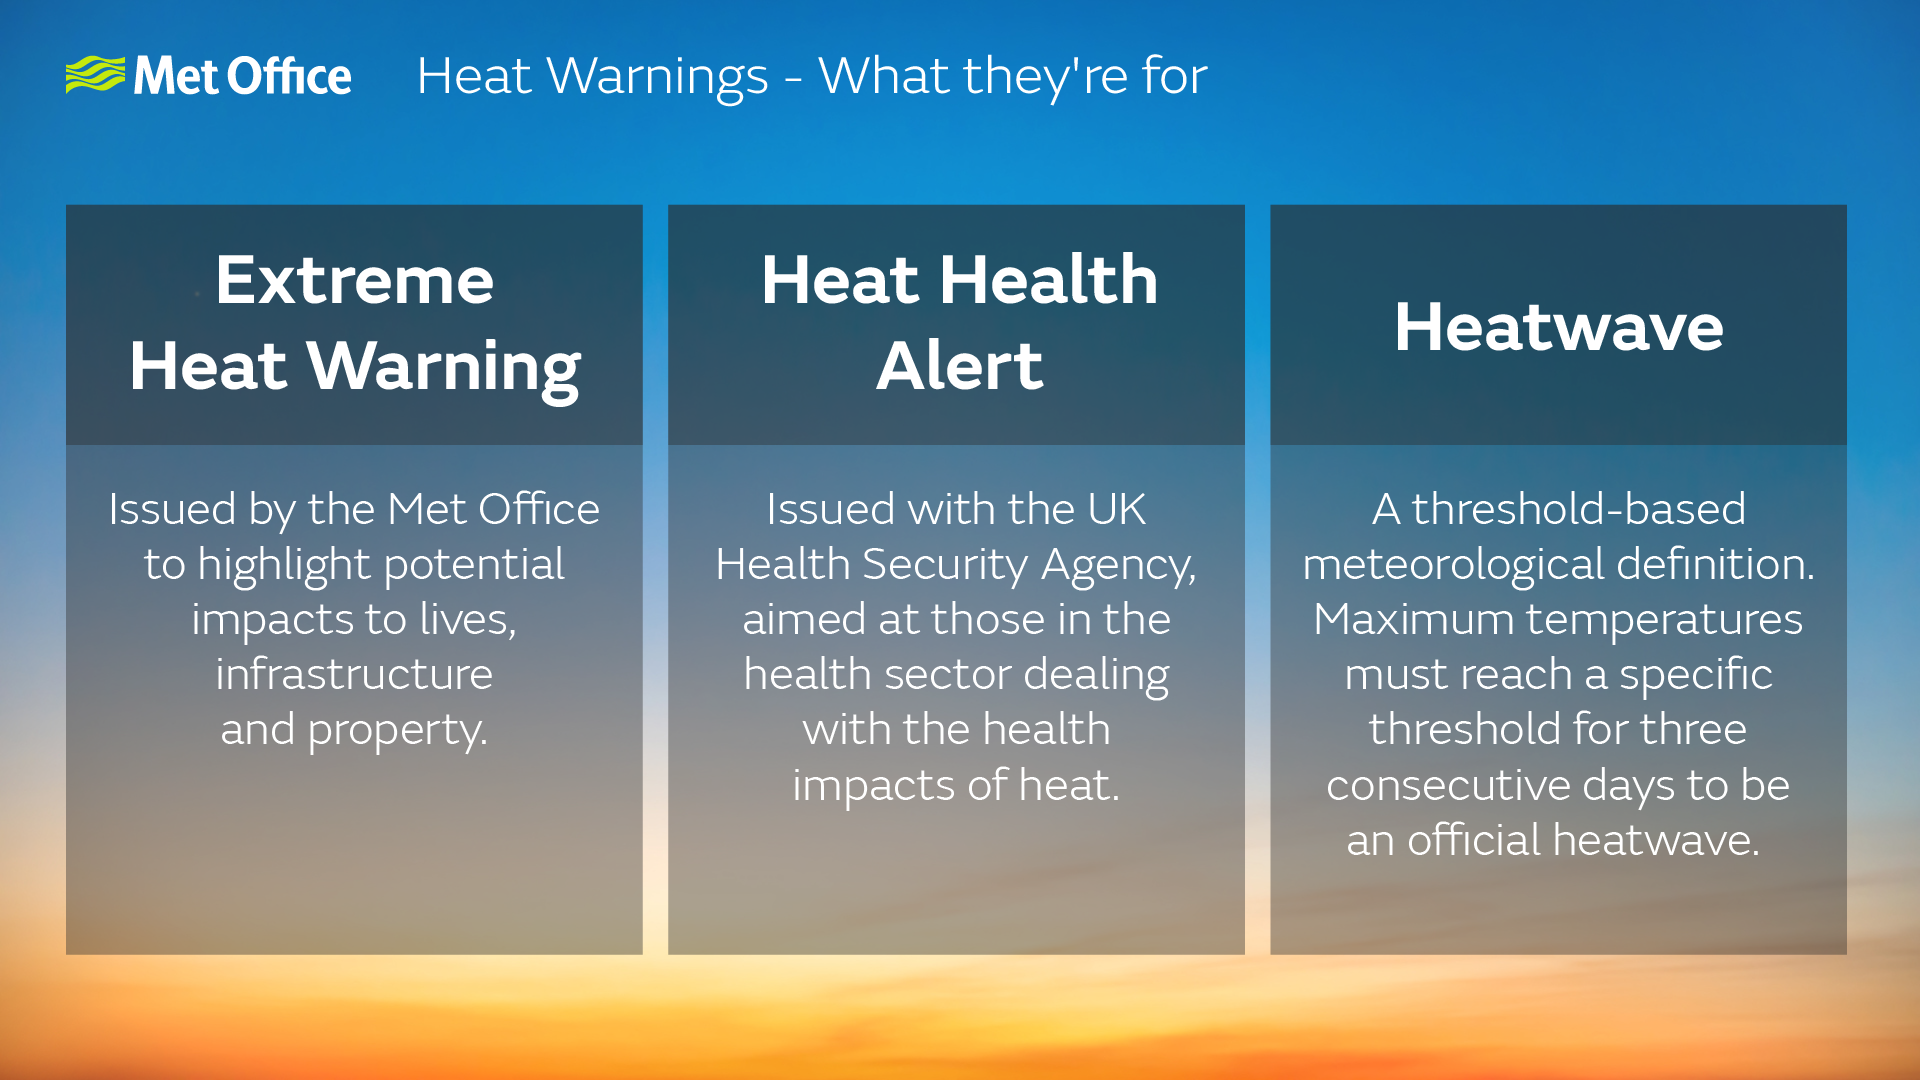 The graphic shows that and Extreme heat warning is a Met Office impact-based warning for the UK. A Heat Health Alert is issued by the UKHSA with particular focus on healthcare professionals. A heatwave is a Met Office definition, where temperature thresholds must be met three days running.